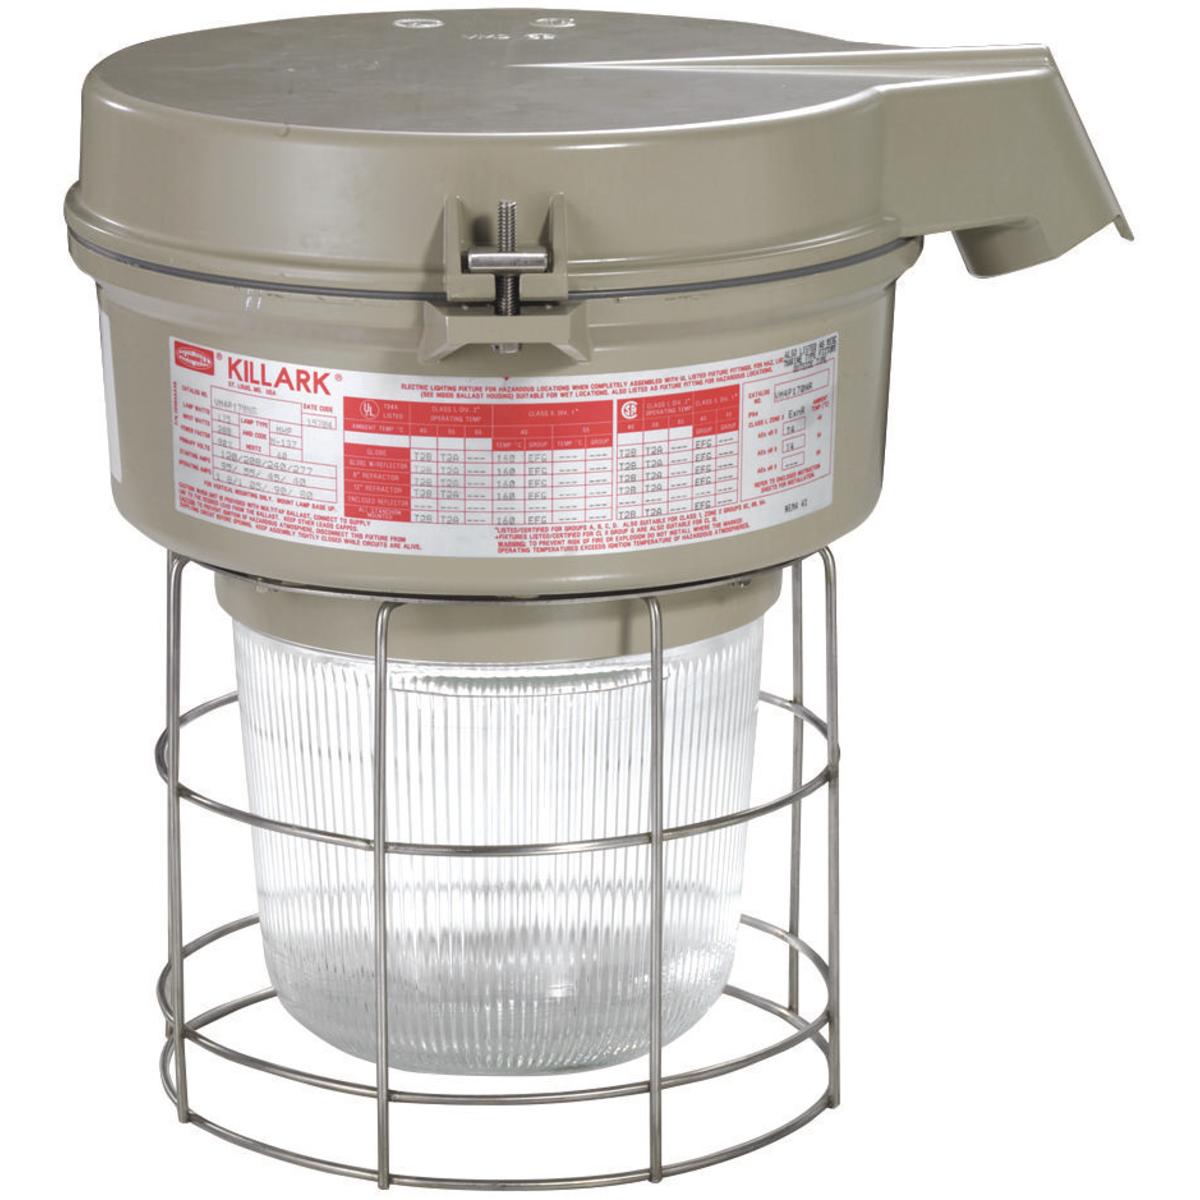 Hubbell VM4H100D5GLG VM4 Series - 100W Metal Halide Quadri-Volt - 1-1/2" Stanchion 25° - Globe and Guard  ; Ballast tank and splice box – corrosion resistant copper-free aluminum alloy with baked powder epoxy/polyester finish, electrostatically applied for complete, uniform c